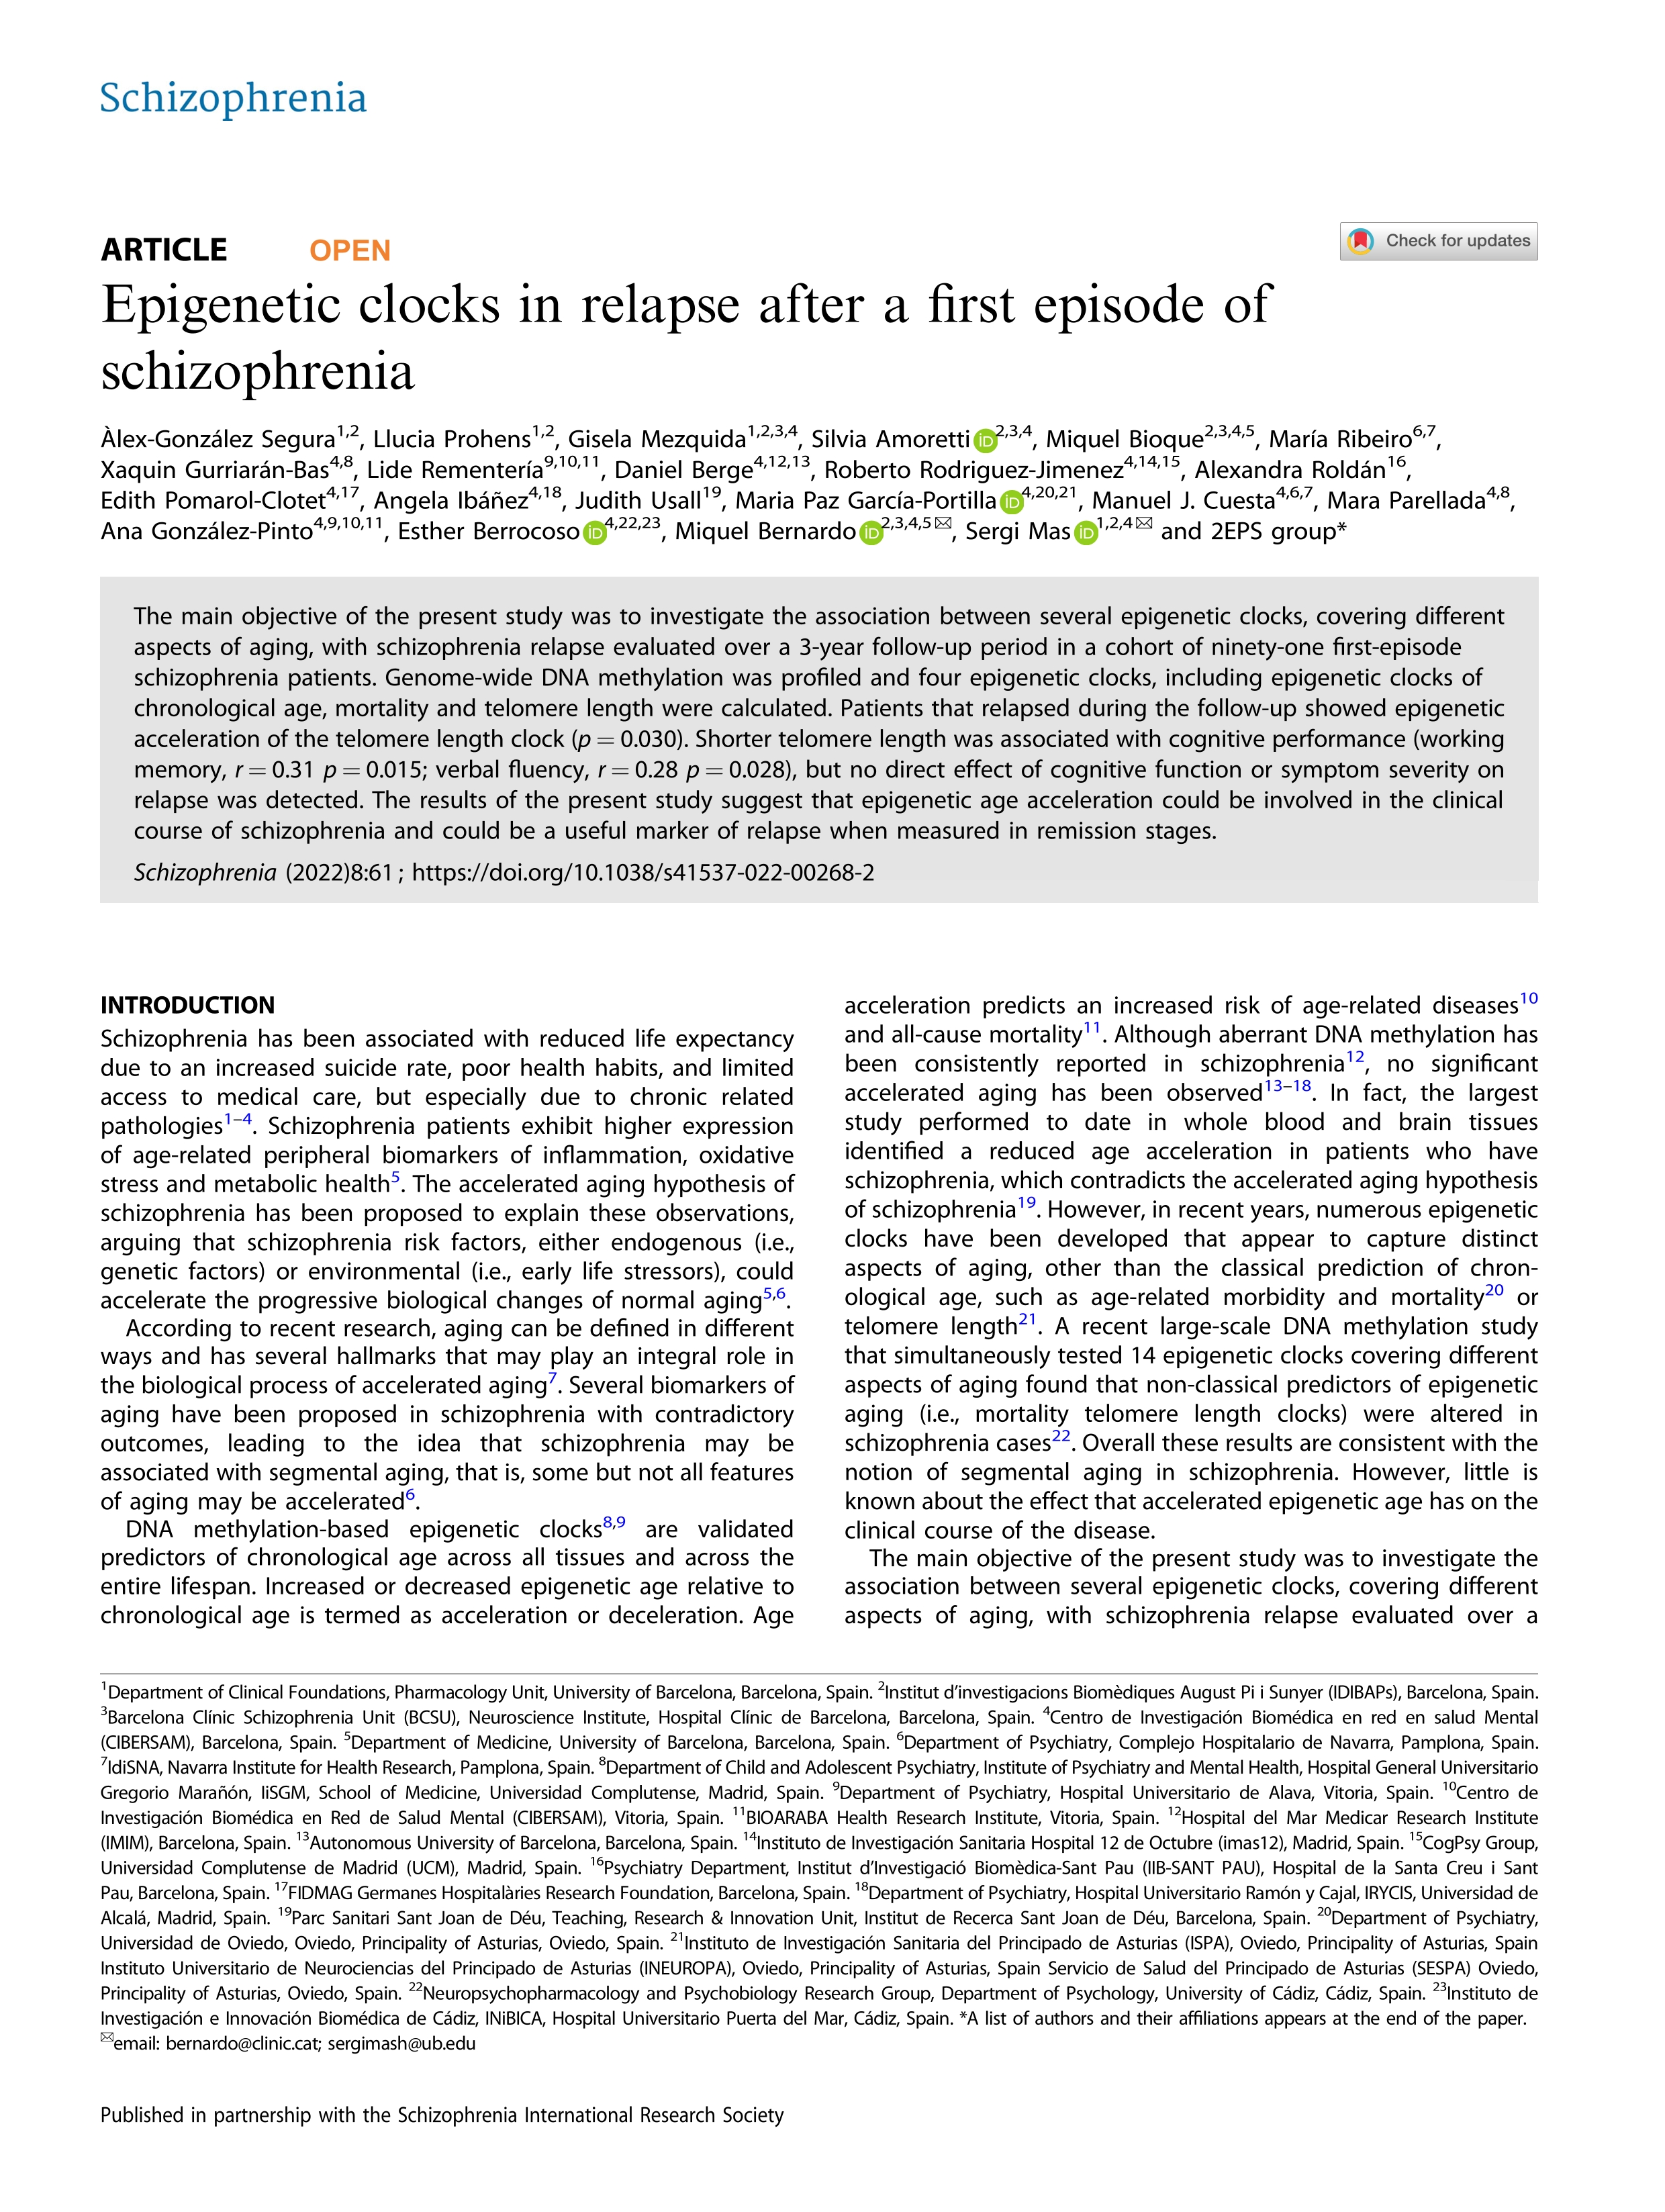 Epigenetic clocks in relapse after a first episode of schizophrenia